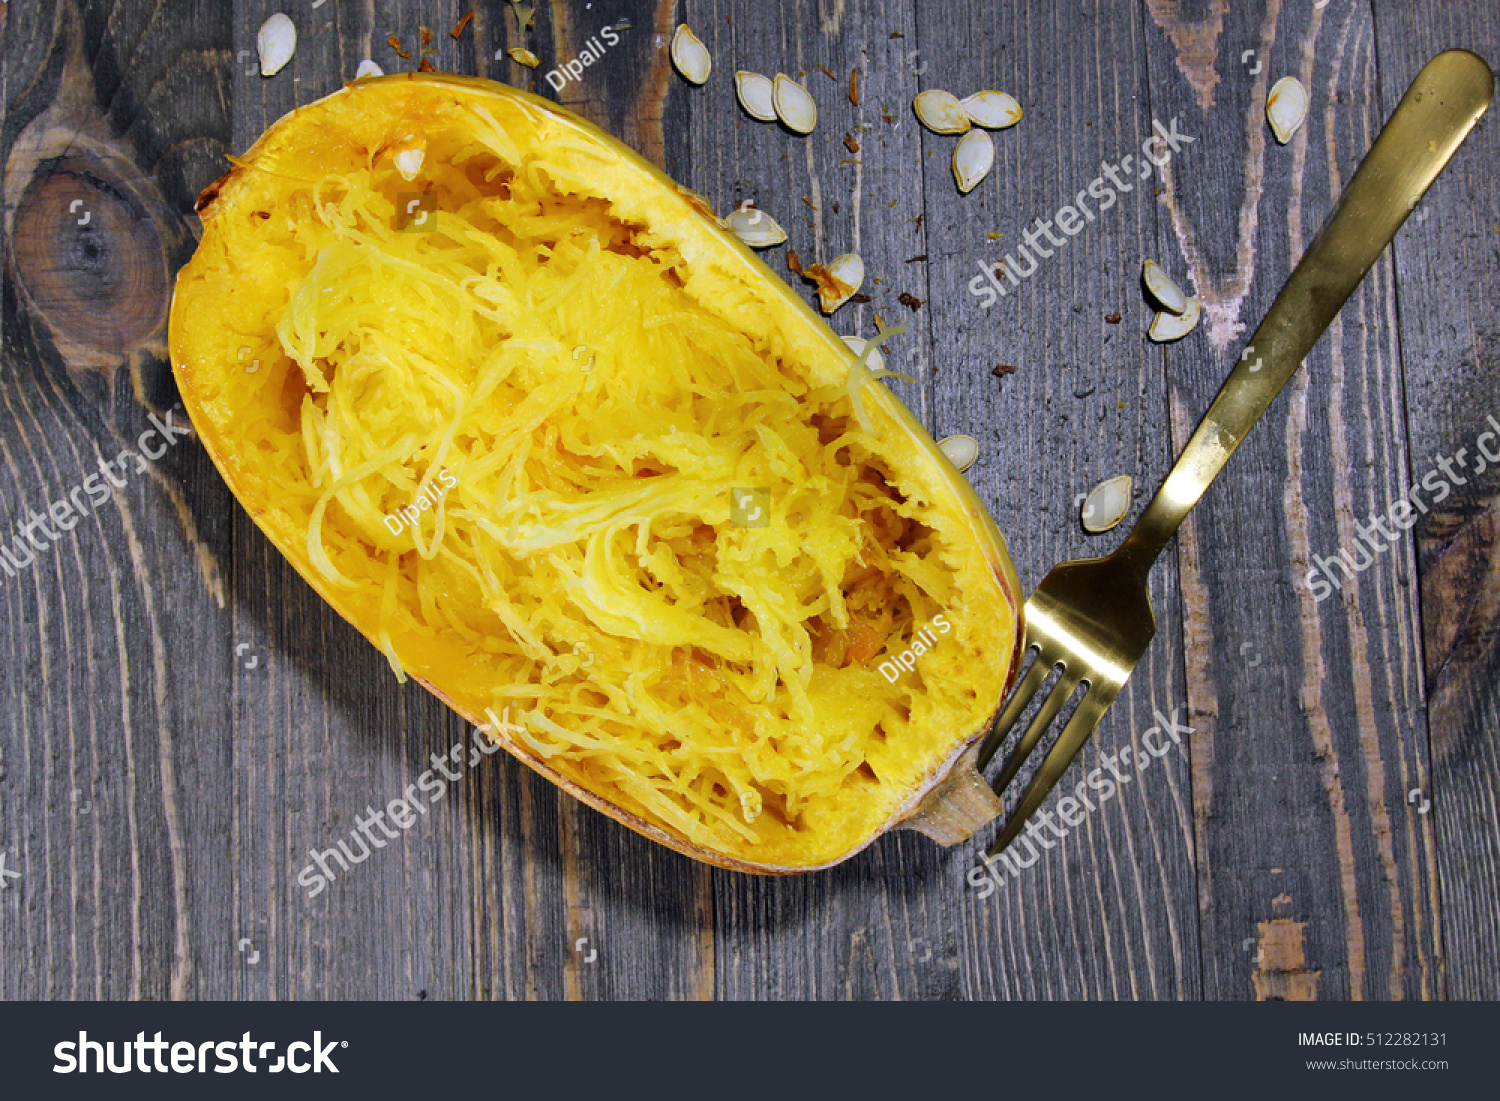 Overhead view of Spaghetti squash on a wooden background with squash seeds #512282131